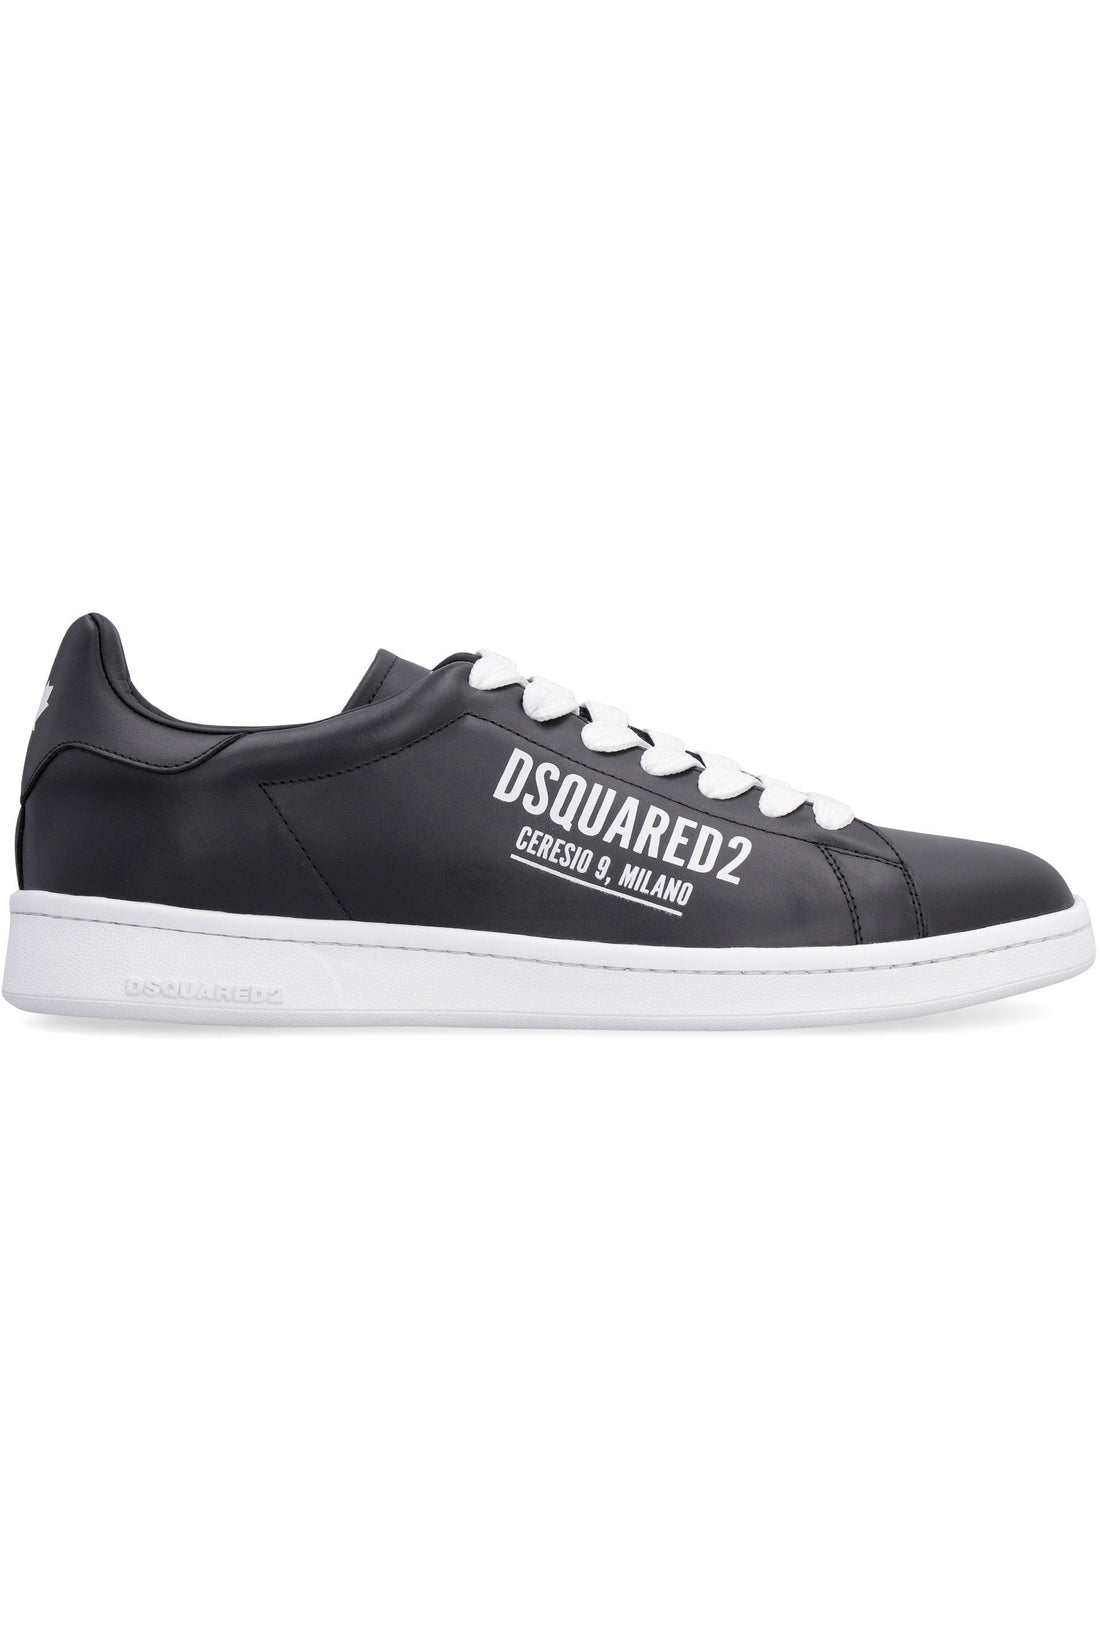 Dsquared2-OUTLET-SALE-Boxer leather low-top sneakers-ARCHIVIST